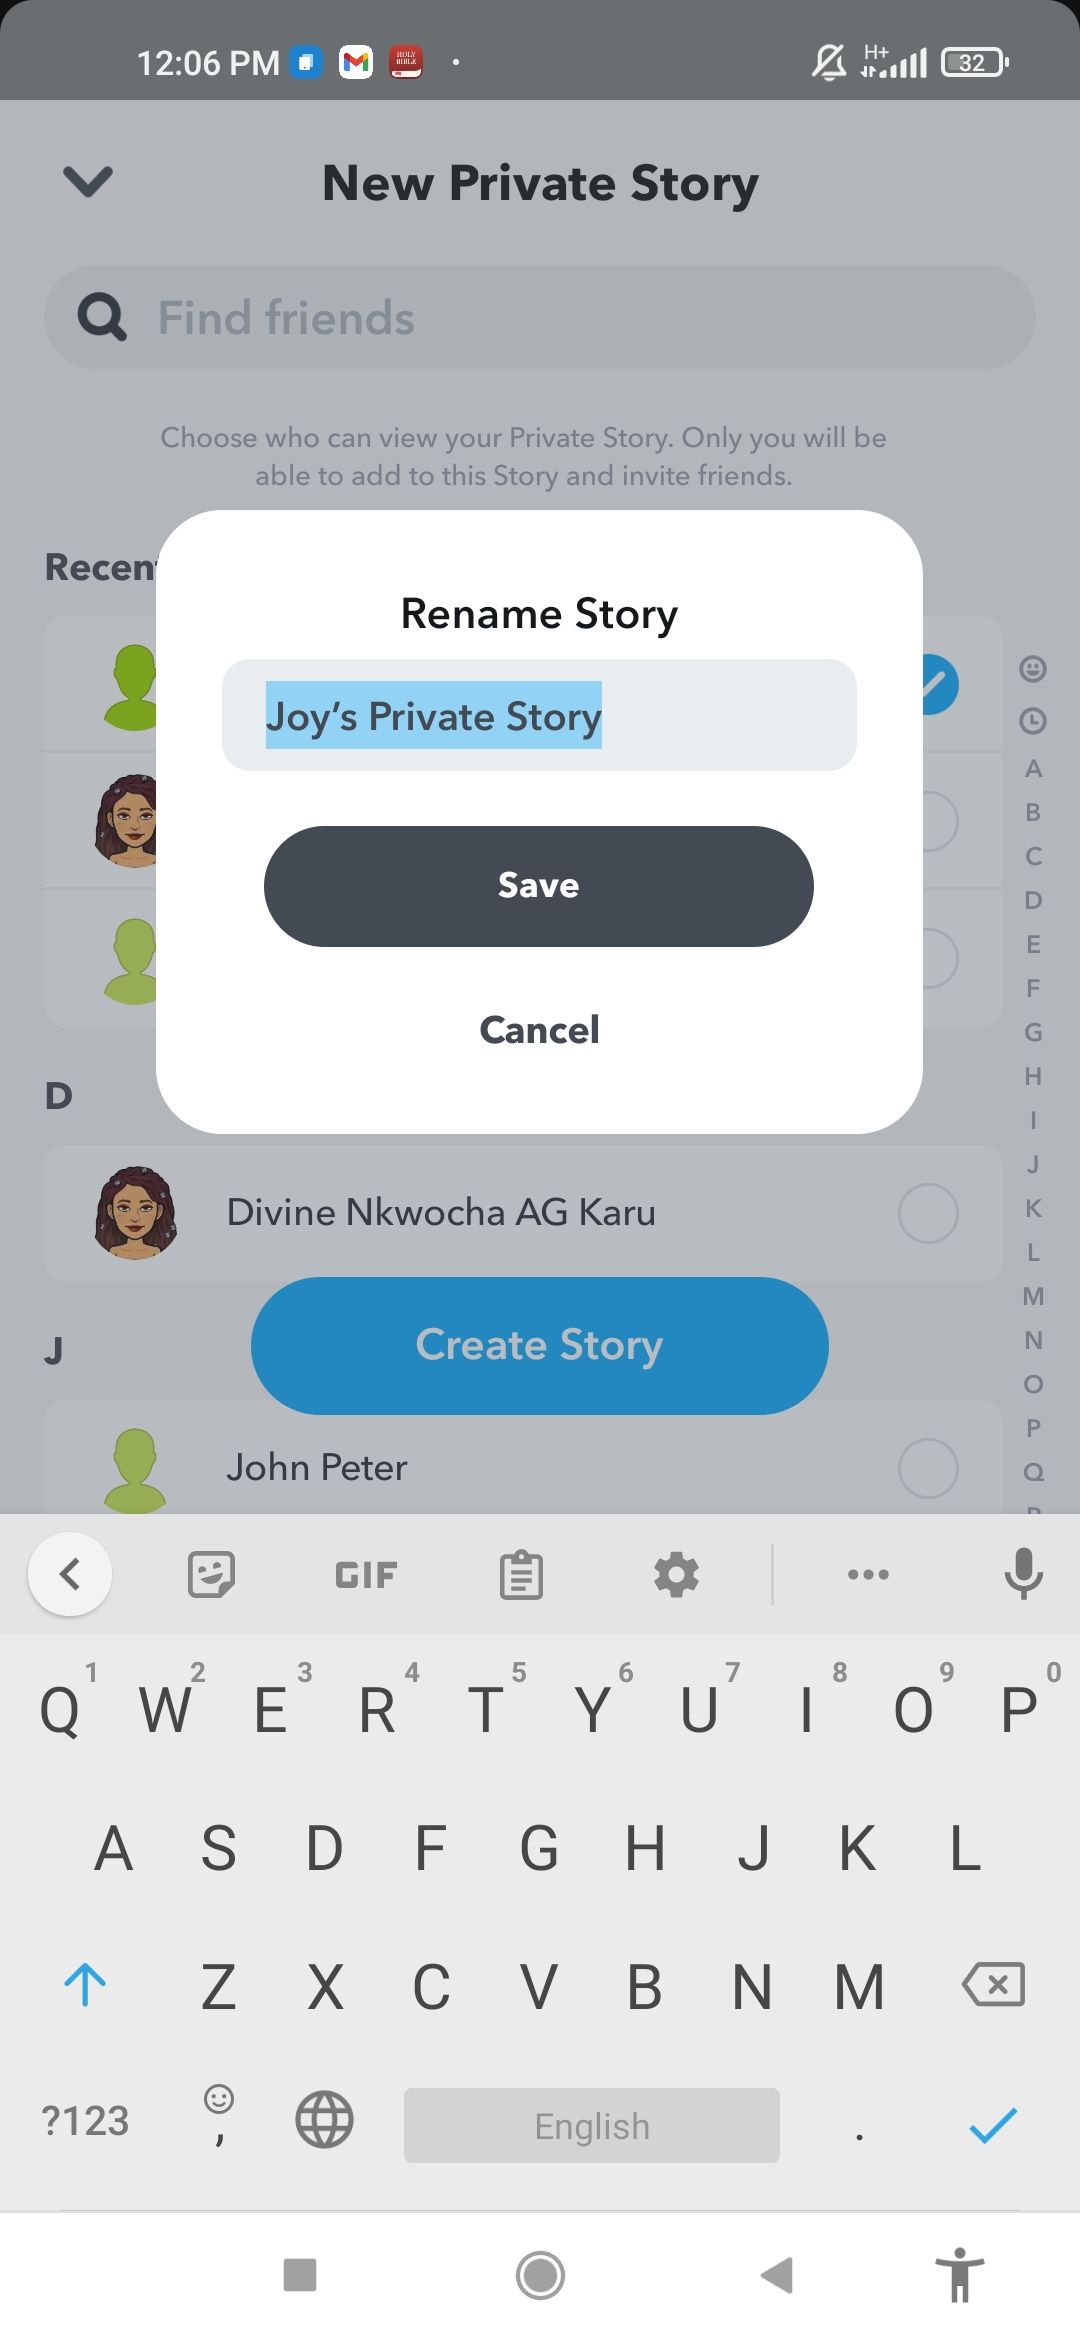 Save your Private Story